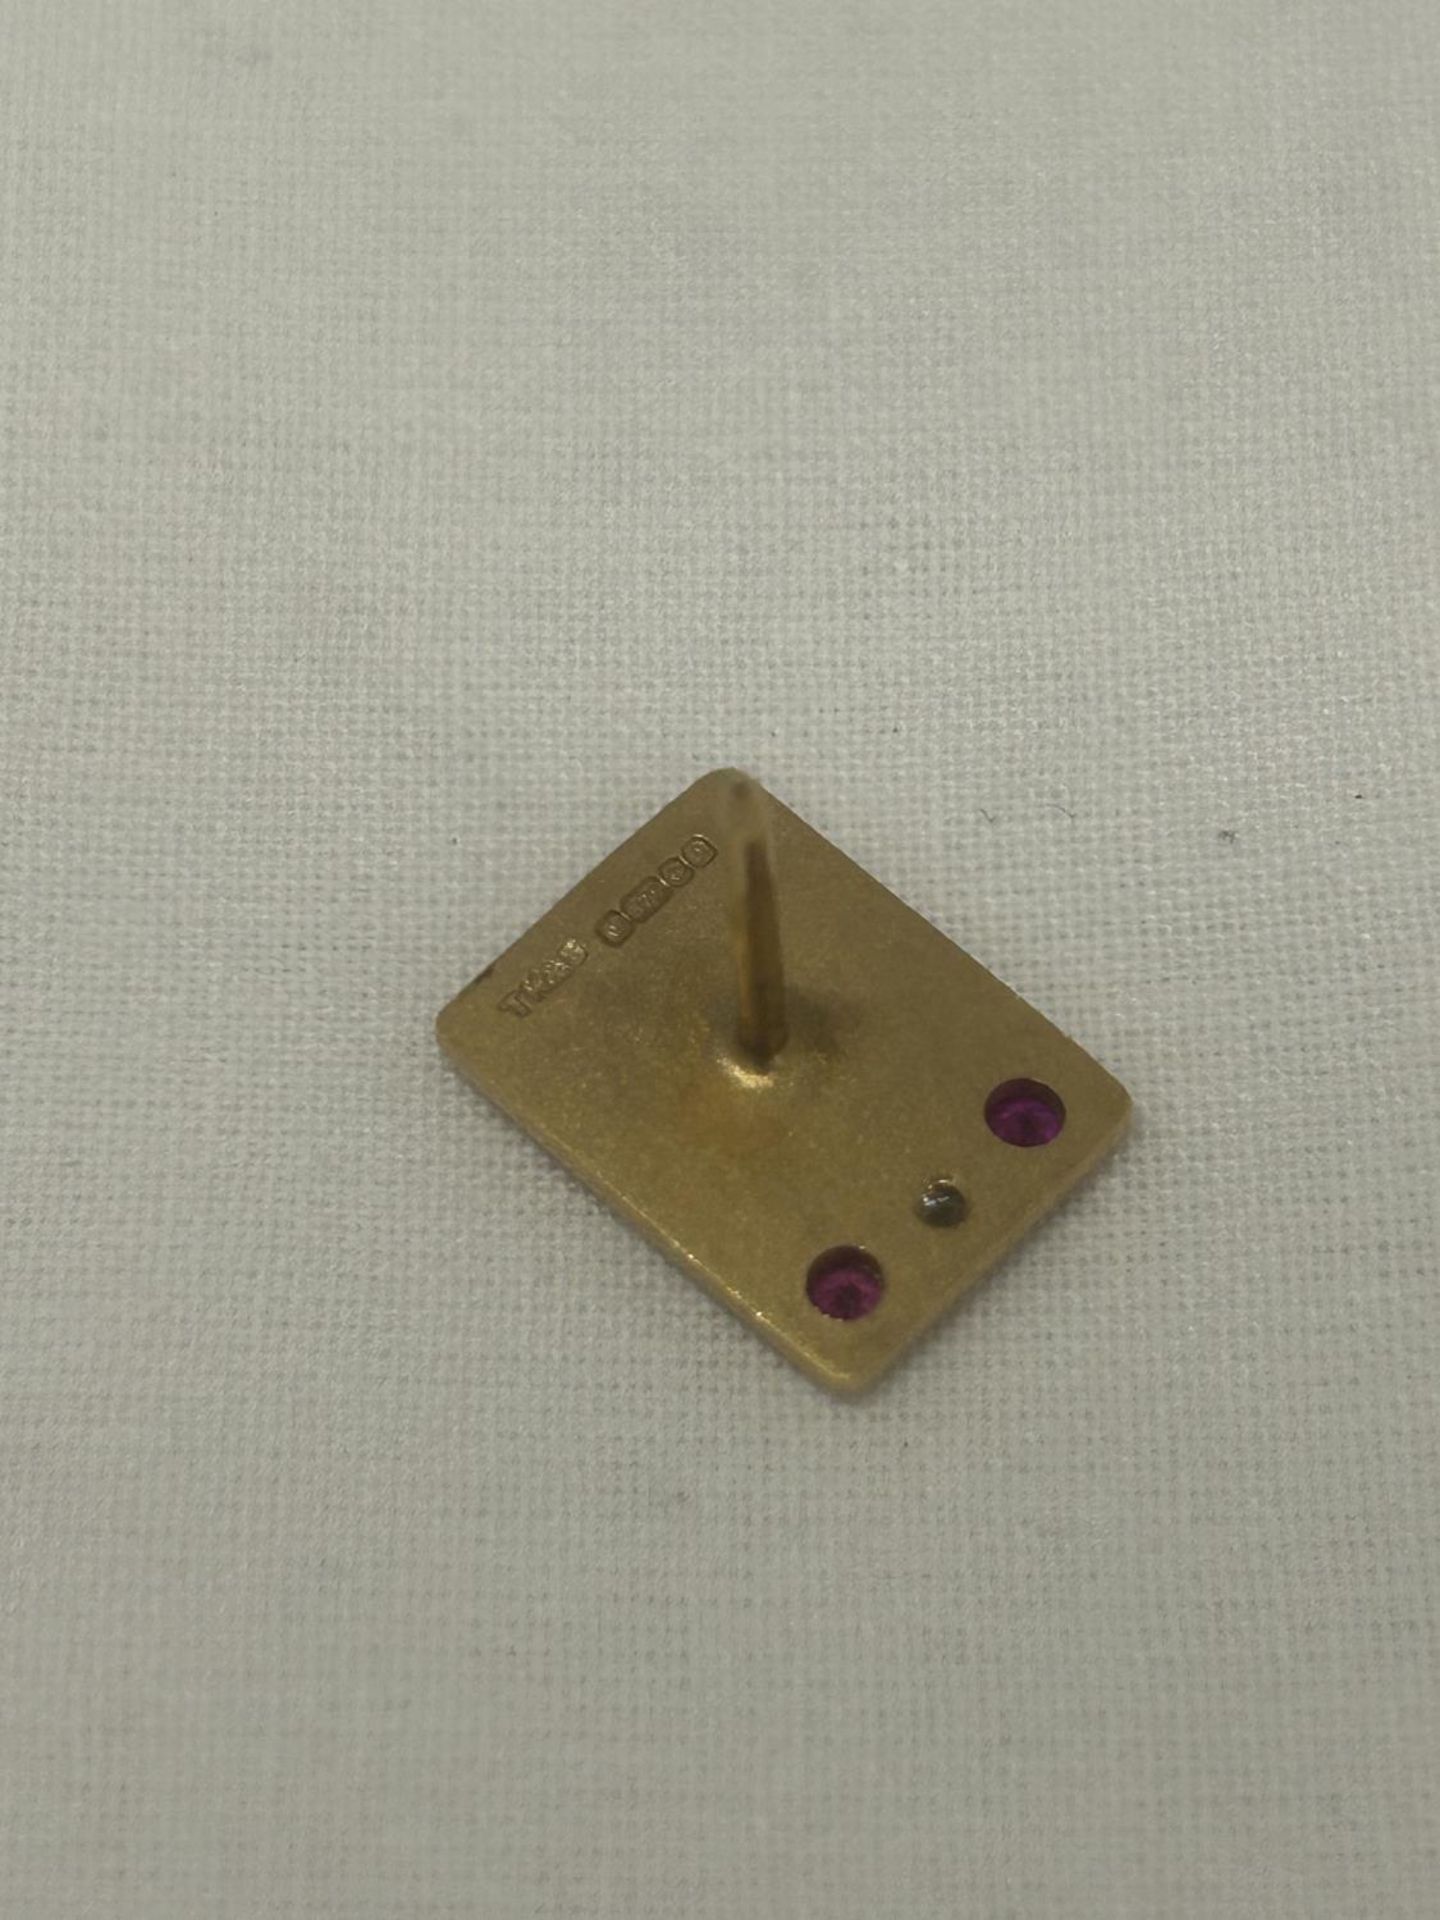 A HALLMARKED 9CT GOLD DIAMOND AND RUBY 'FODEN' PIN BADGE GROSS WEIGHT 4.84G - Image 2 of 4